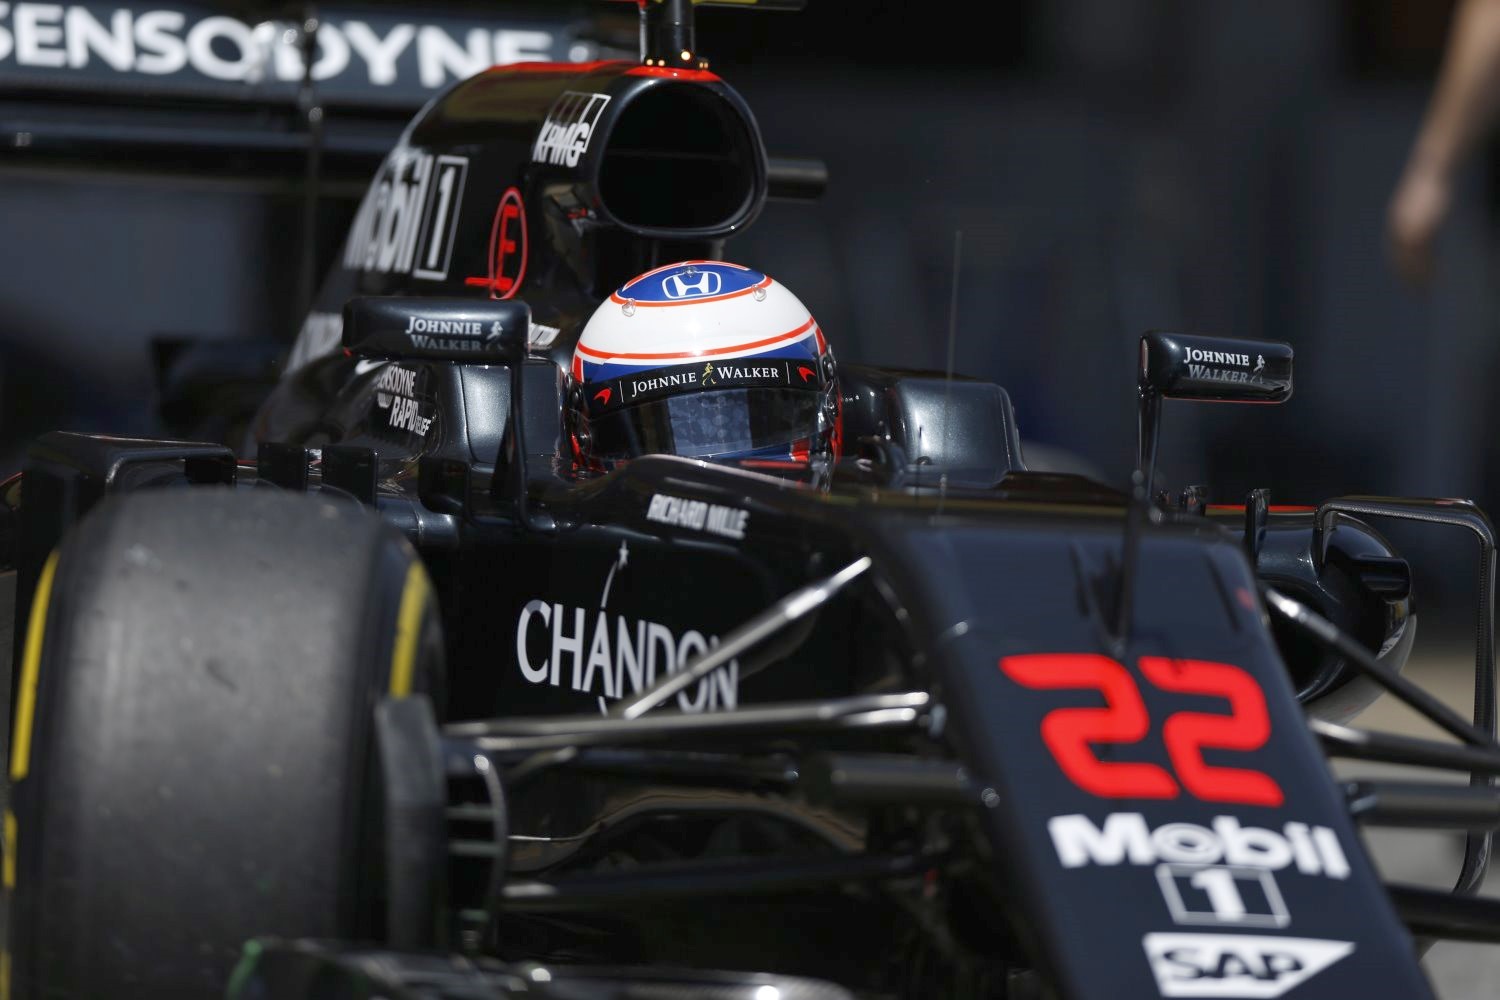 Button's days at McLaren appear numbered